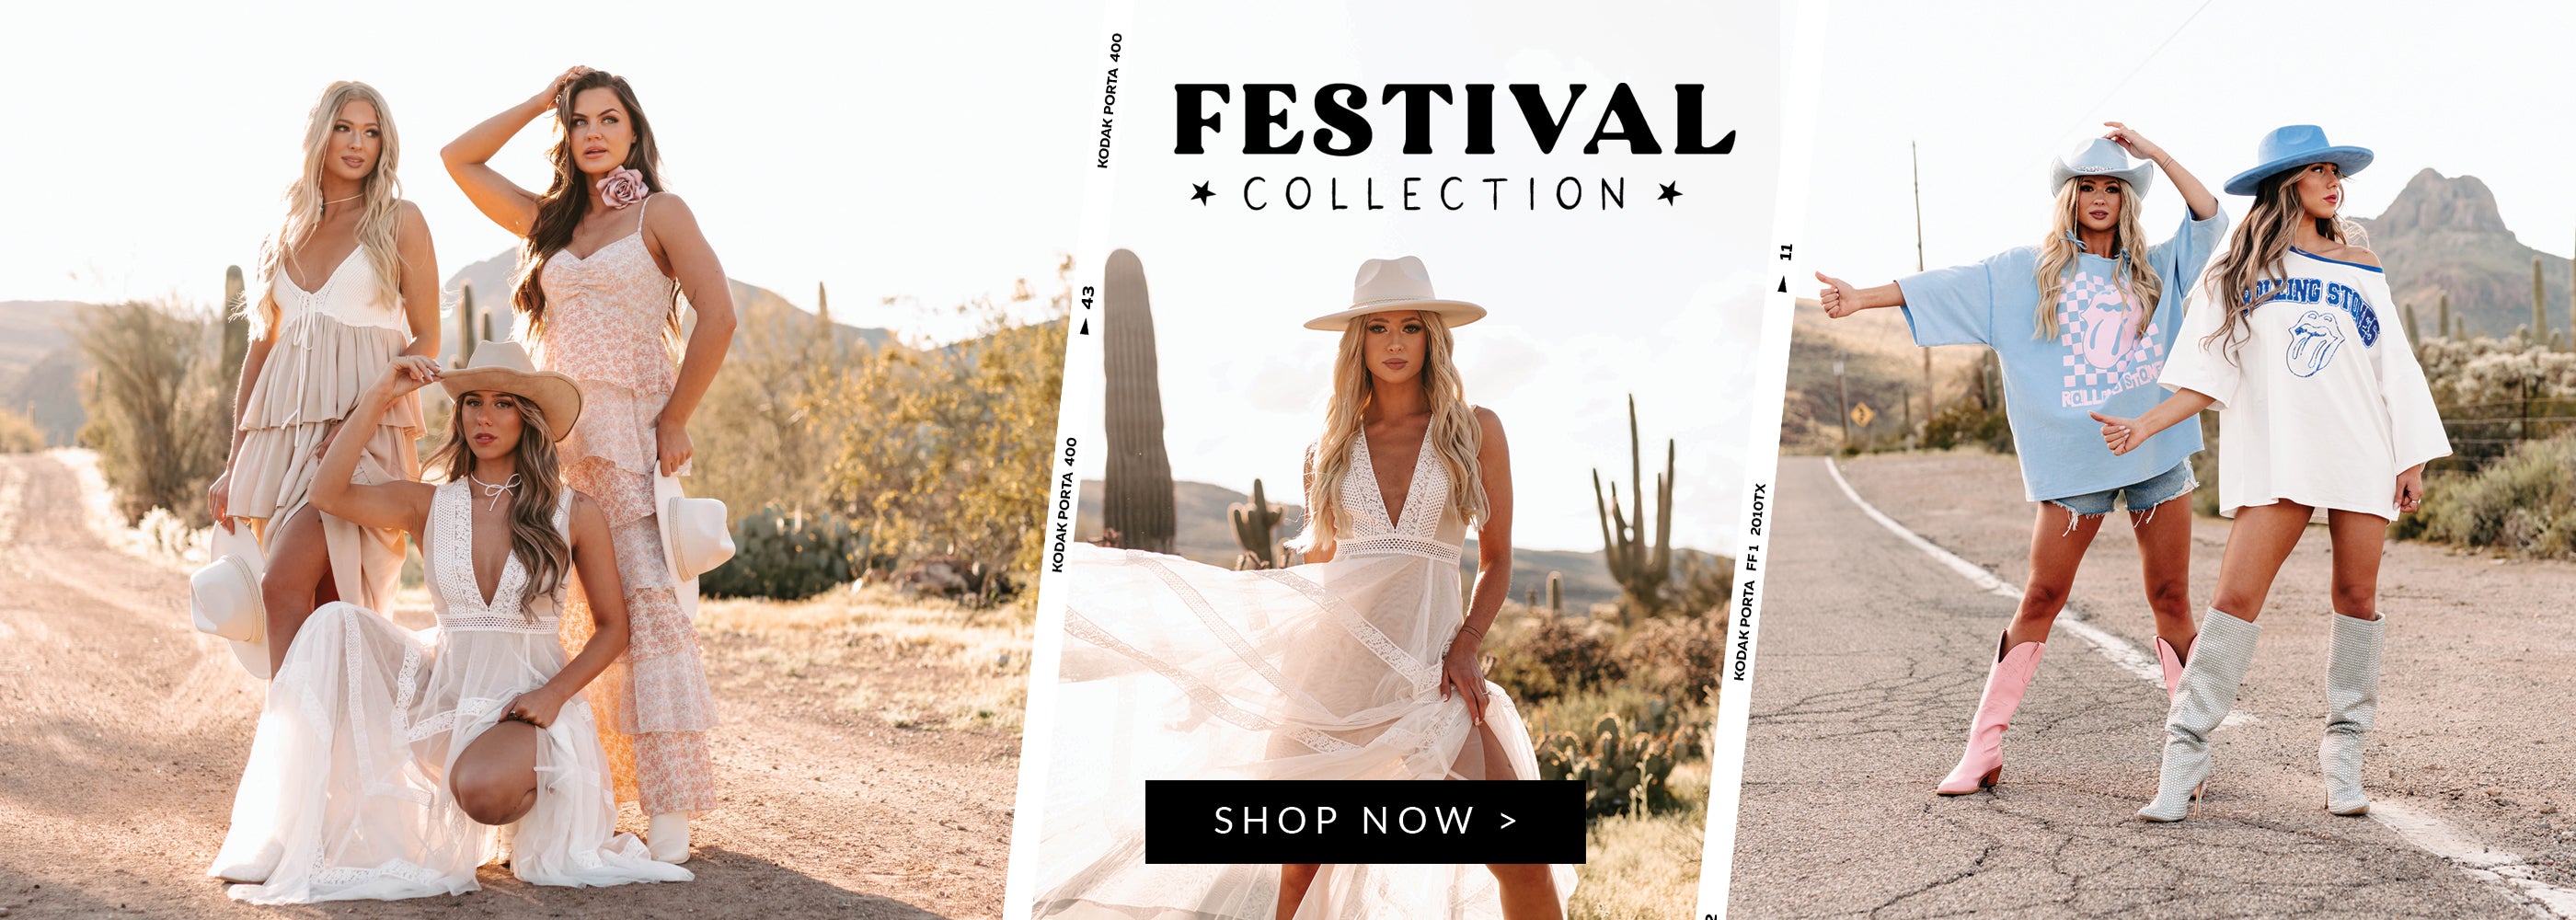 collage of models wearing festival dresses, graphics tees and boots. Headline says "Festival Collection" Call to Action says "Shop Now" and links to the Festival Collection.